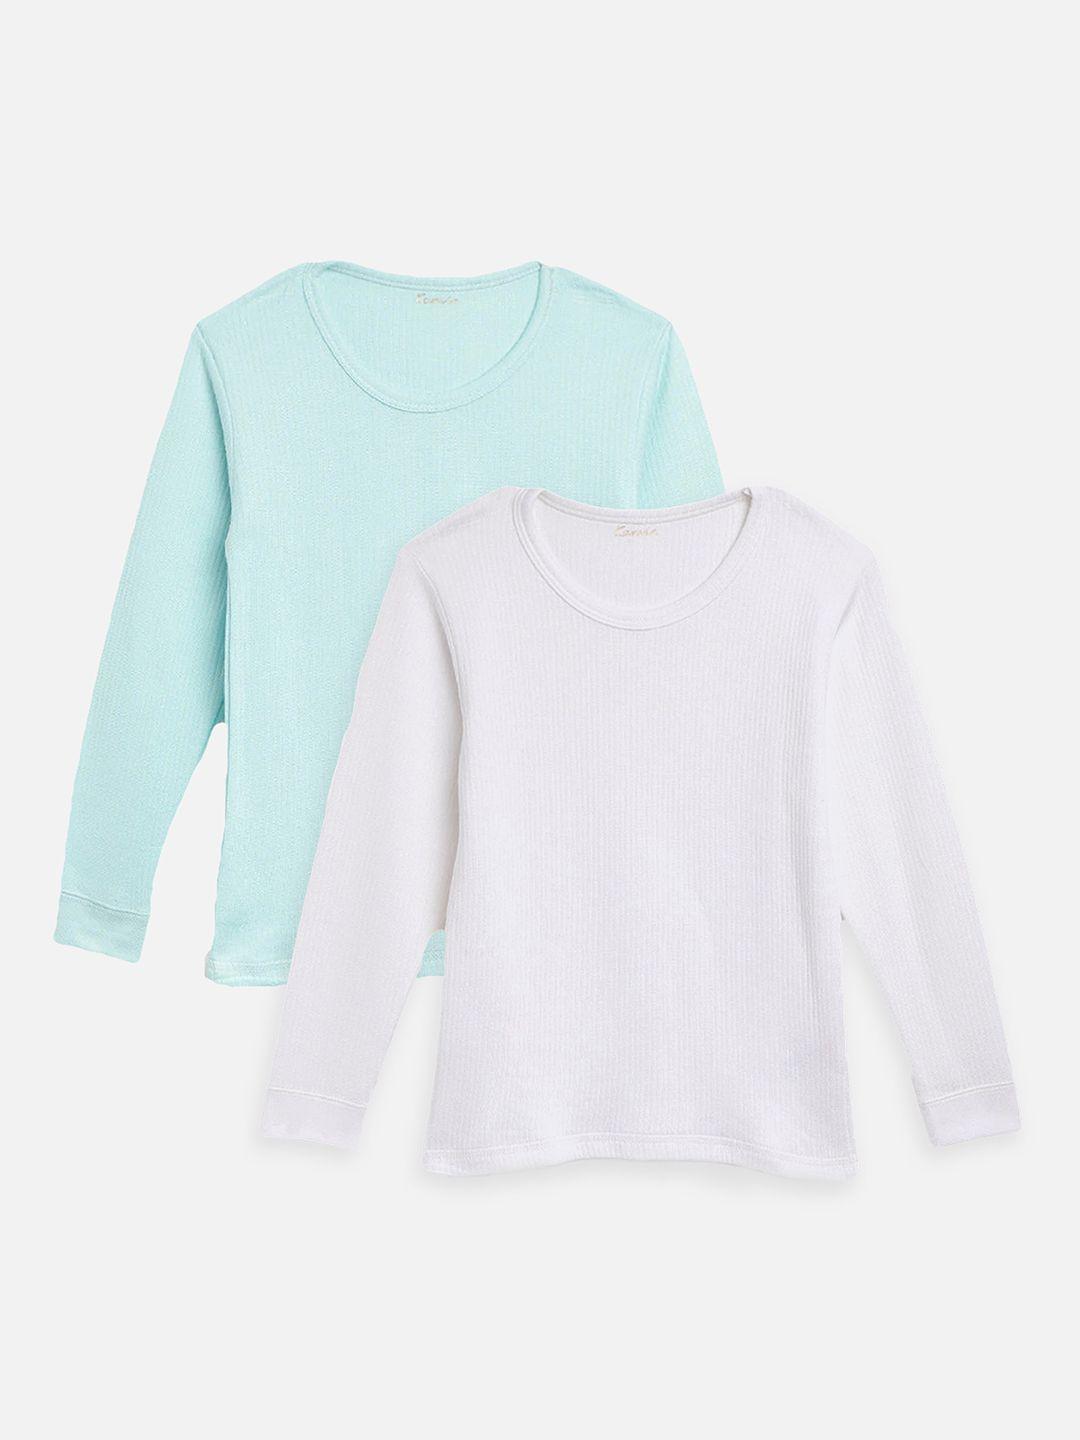 kanvin boys pack of 2 turquoise blue & white ribbed cotton thermal tops